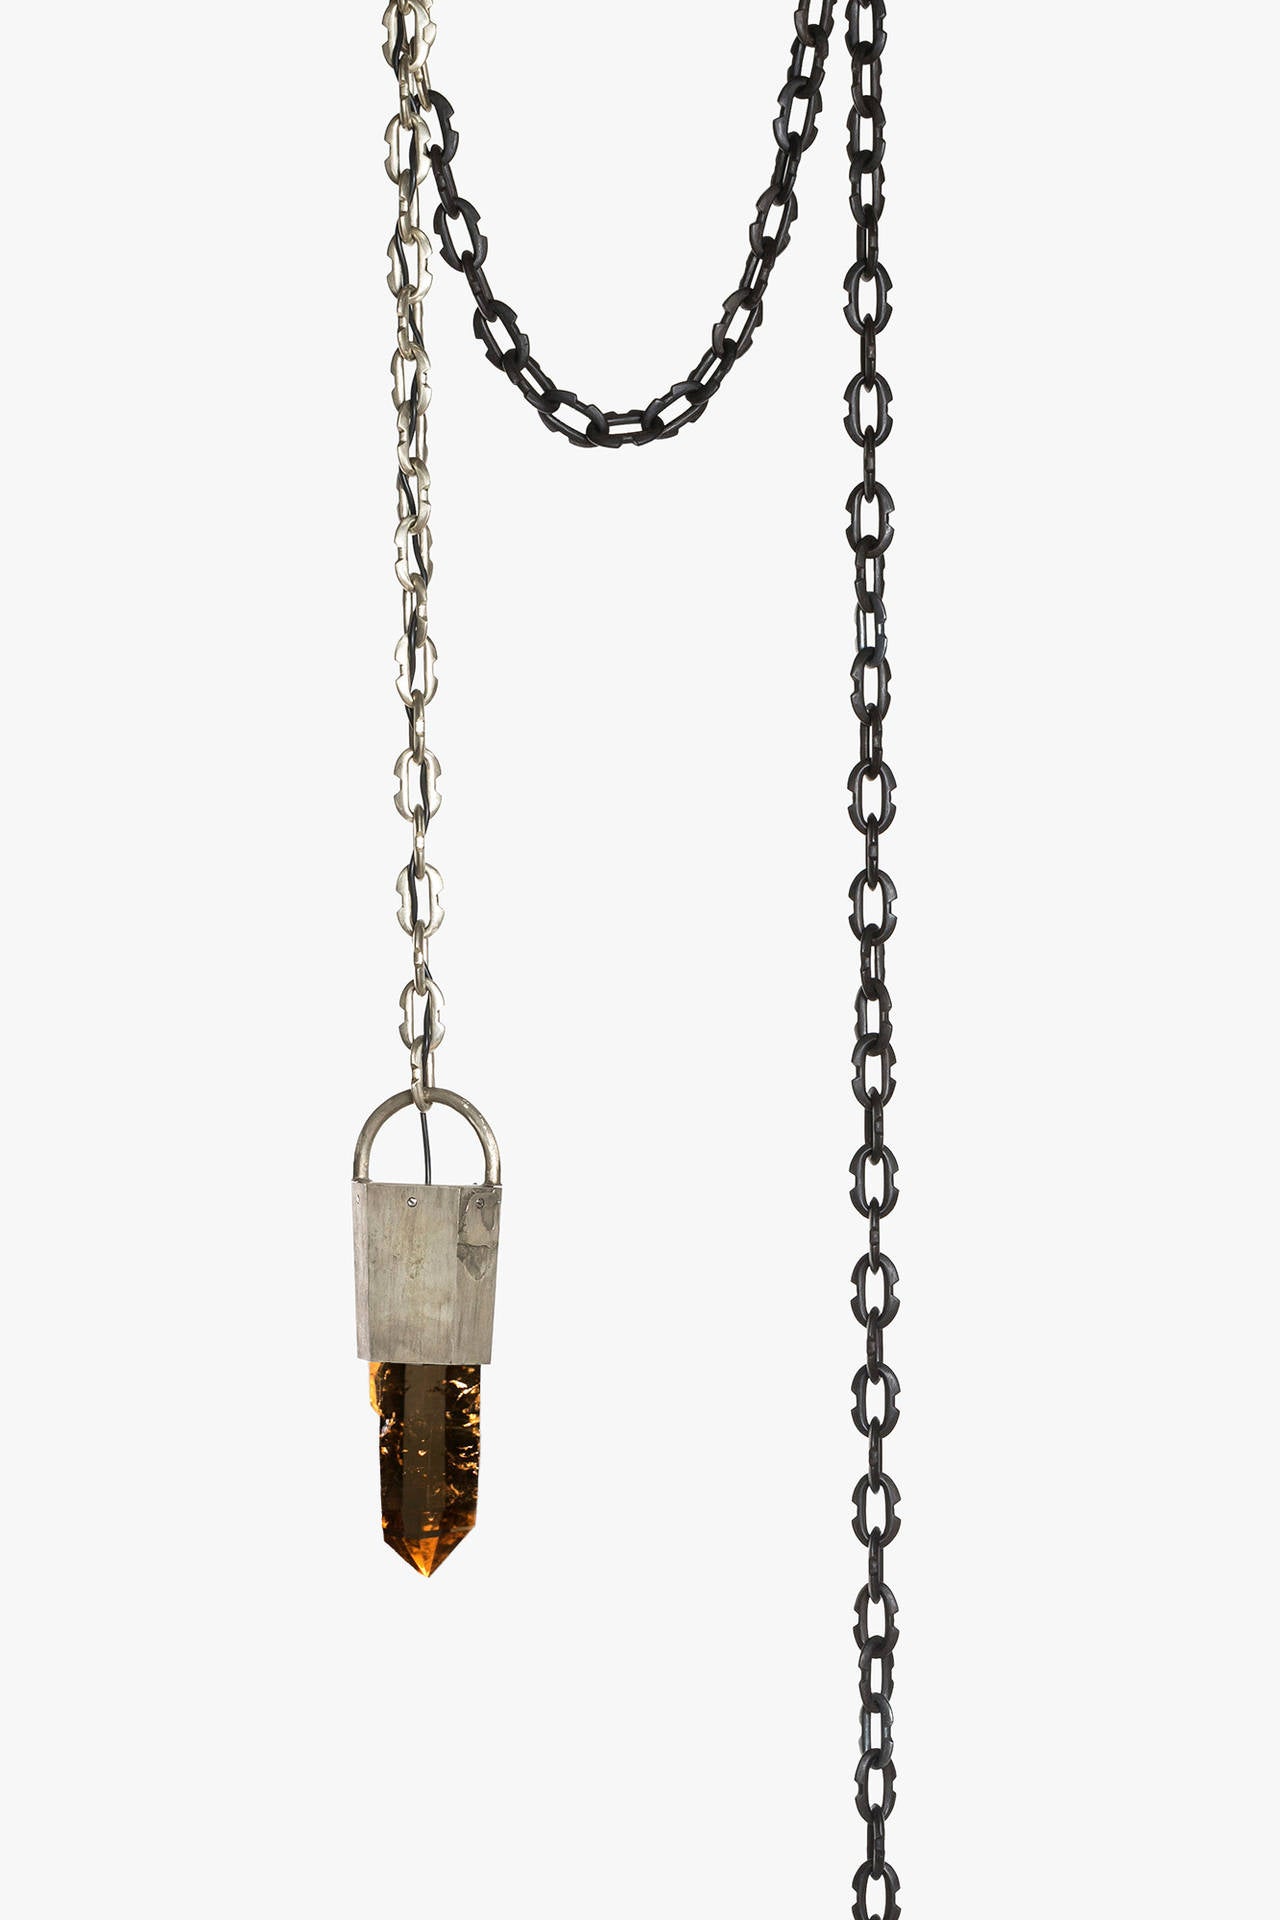 Pendant I by P4h 'Parts of Four Home' available from LMD/studio

Pendant I by P4H (Parts of Four Home) features a citrine quartz crystal compression set into a white bronze pendant, a micro-welded white bronze deco chain and a seamless hand-carved